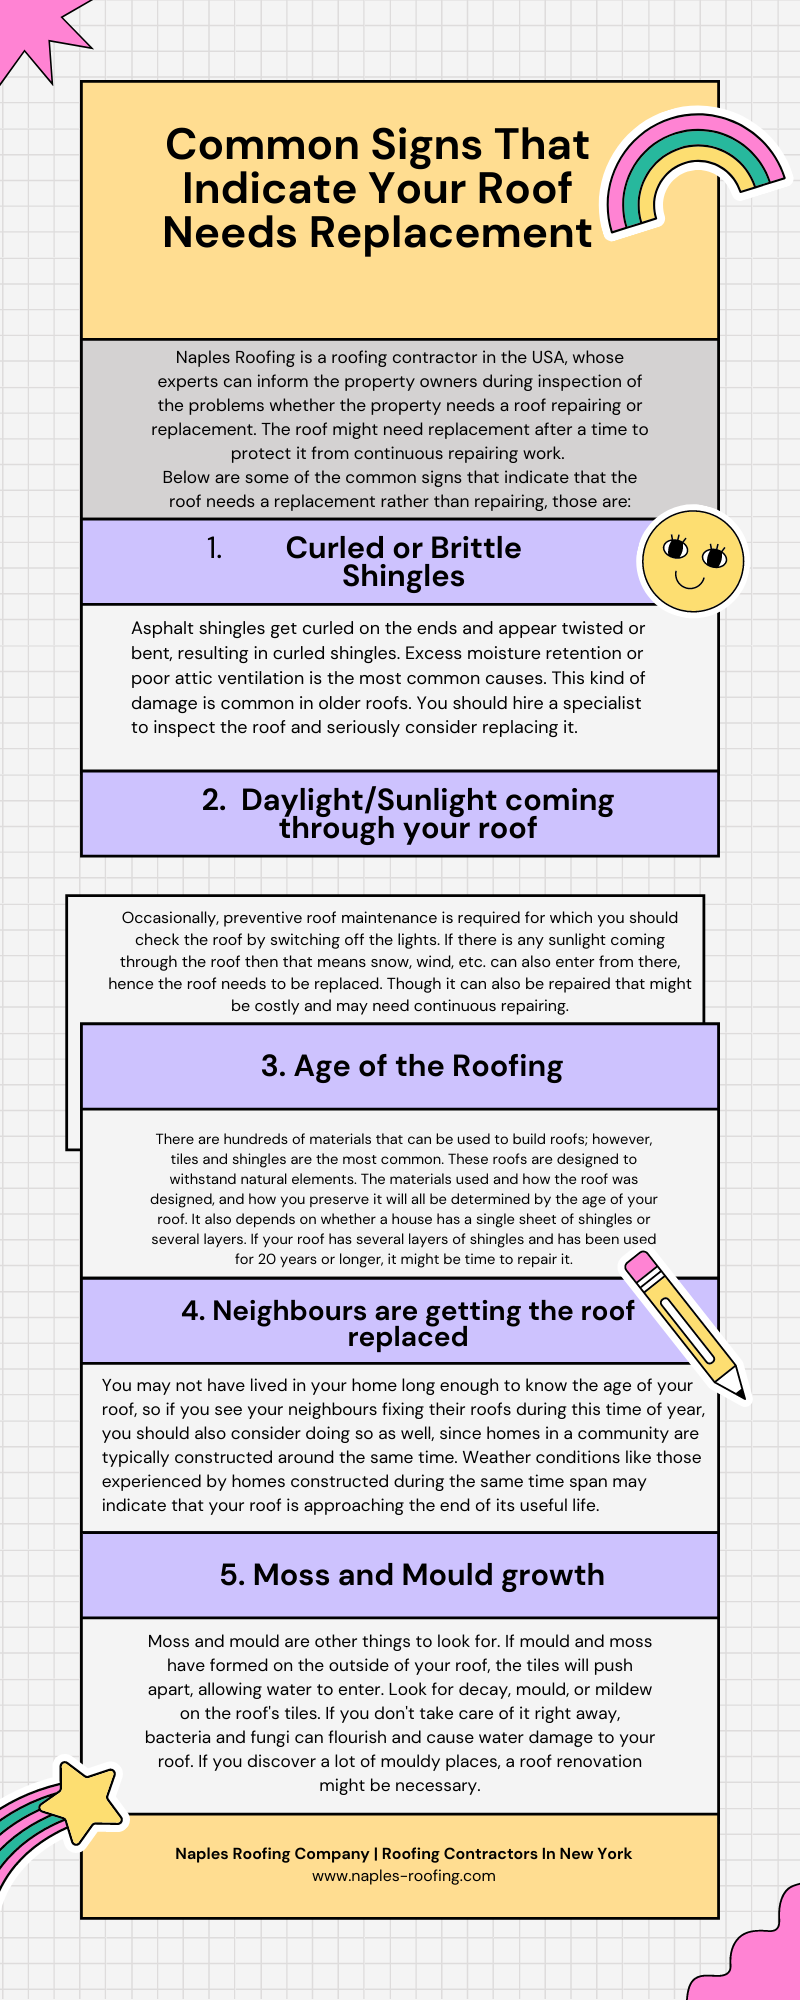 Common Signs That Indicate Your Roof Needs Replacement.png  by naplesroofing